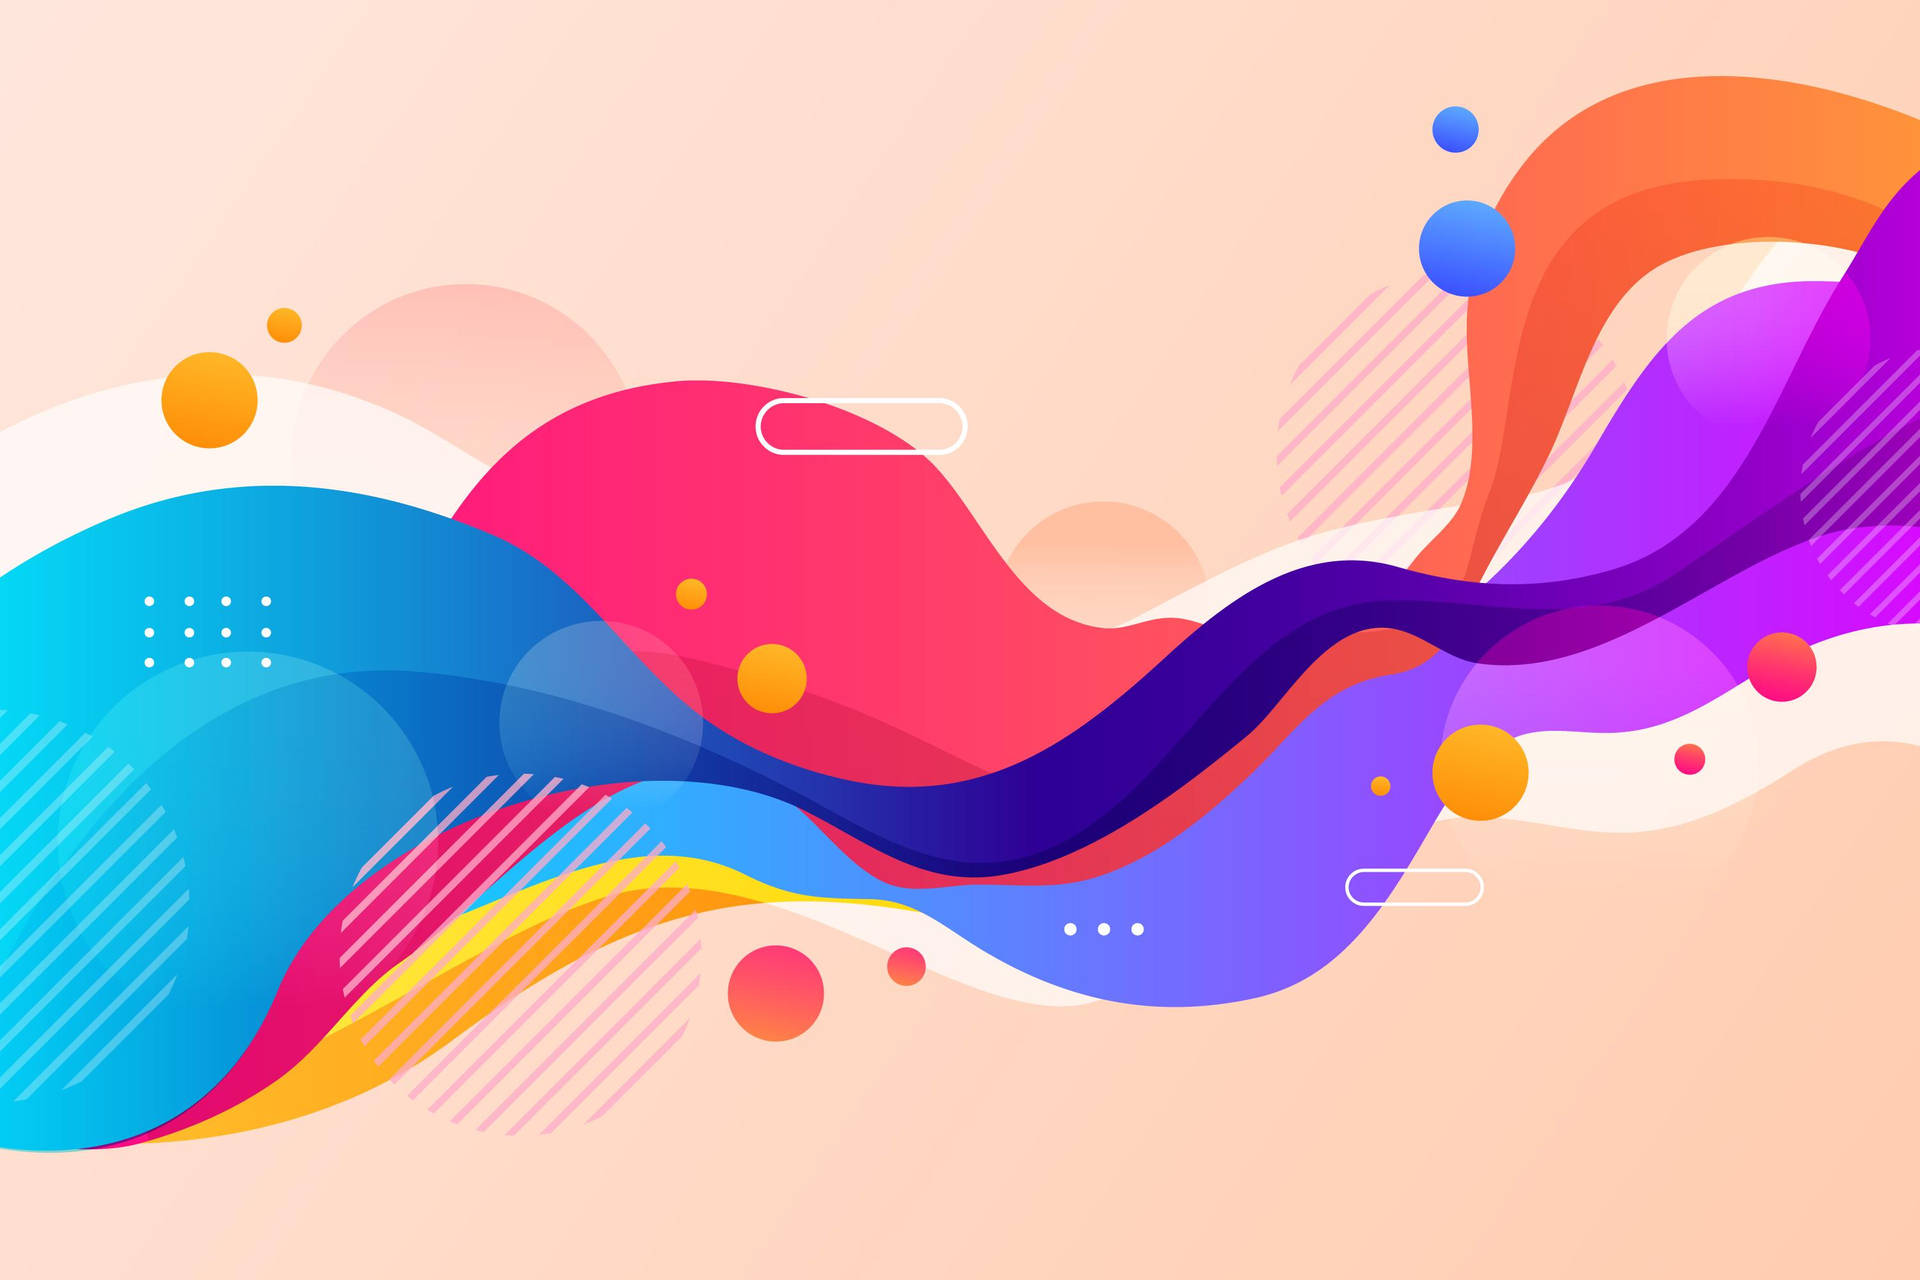 Wavy Shapes For Colorful Background Wallpaper